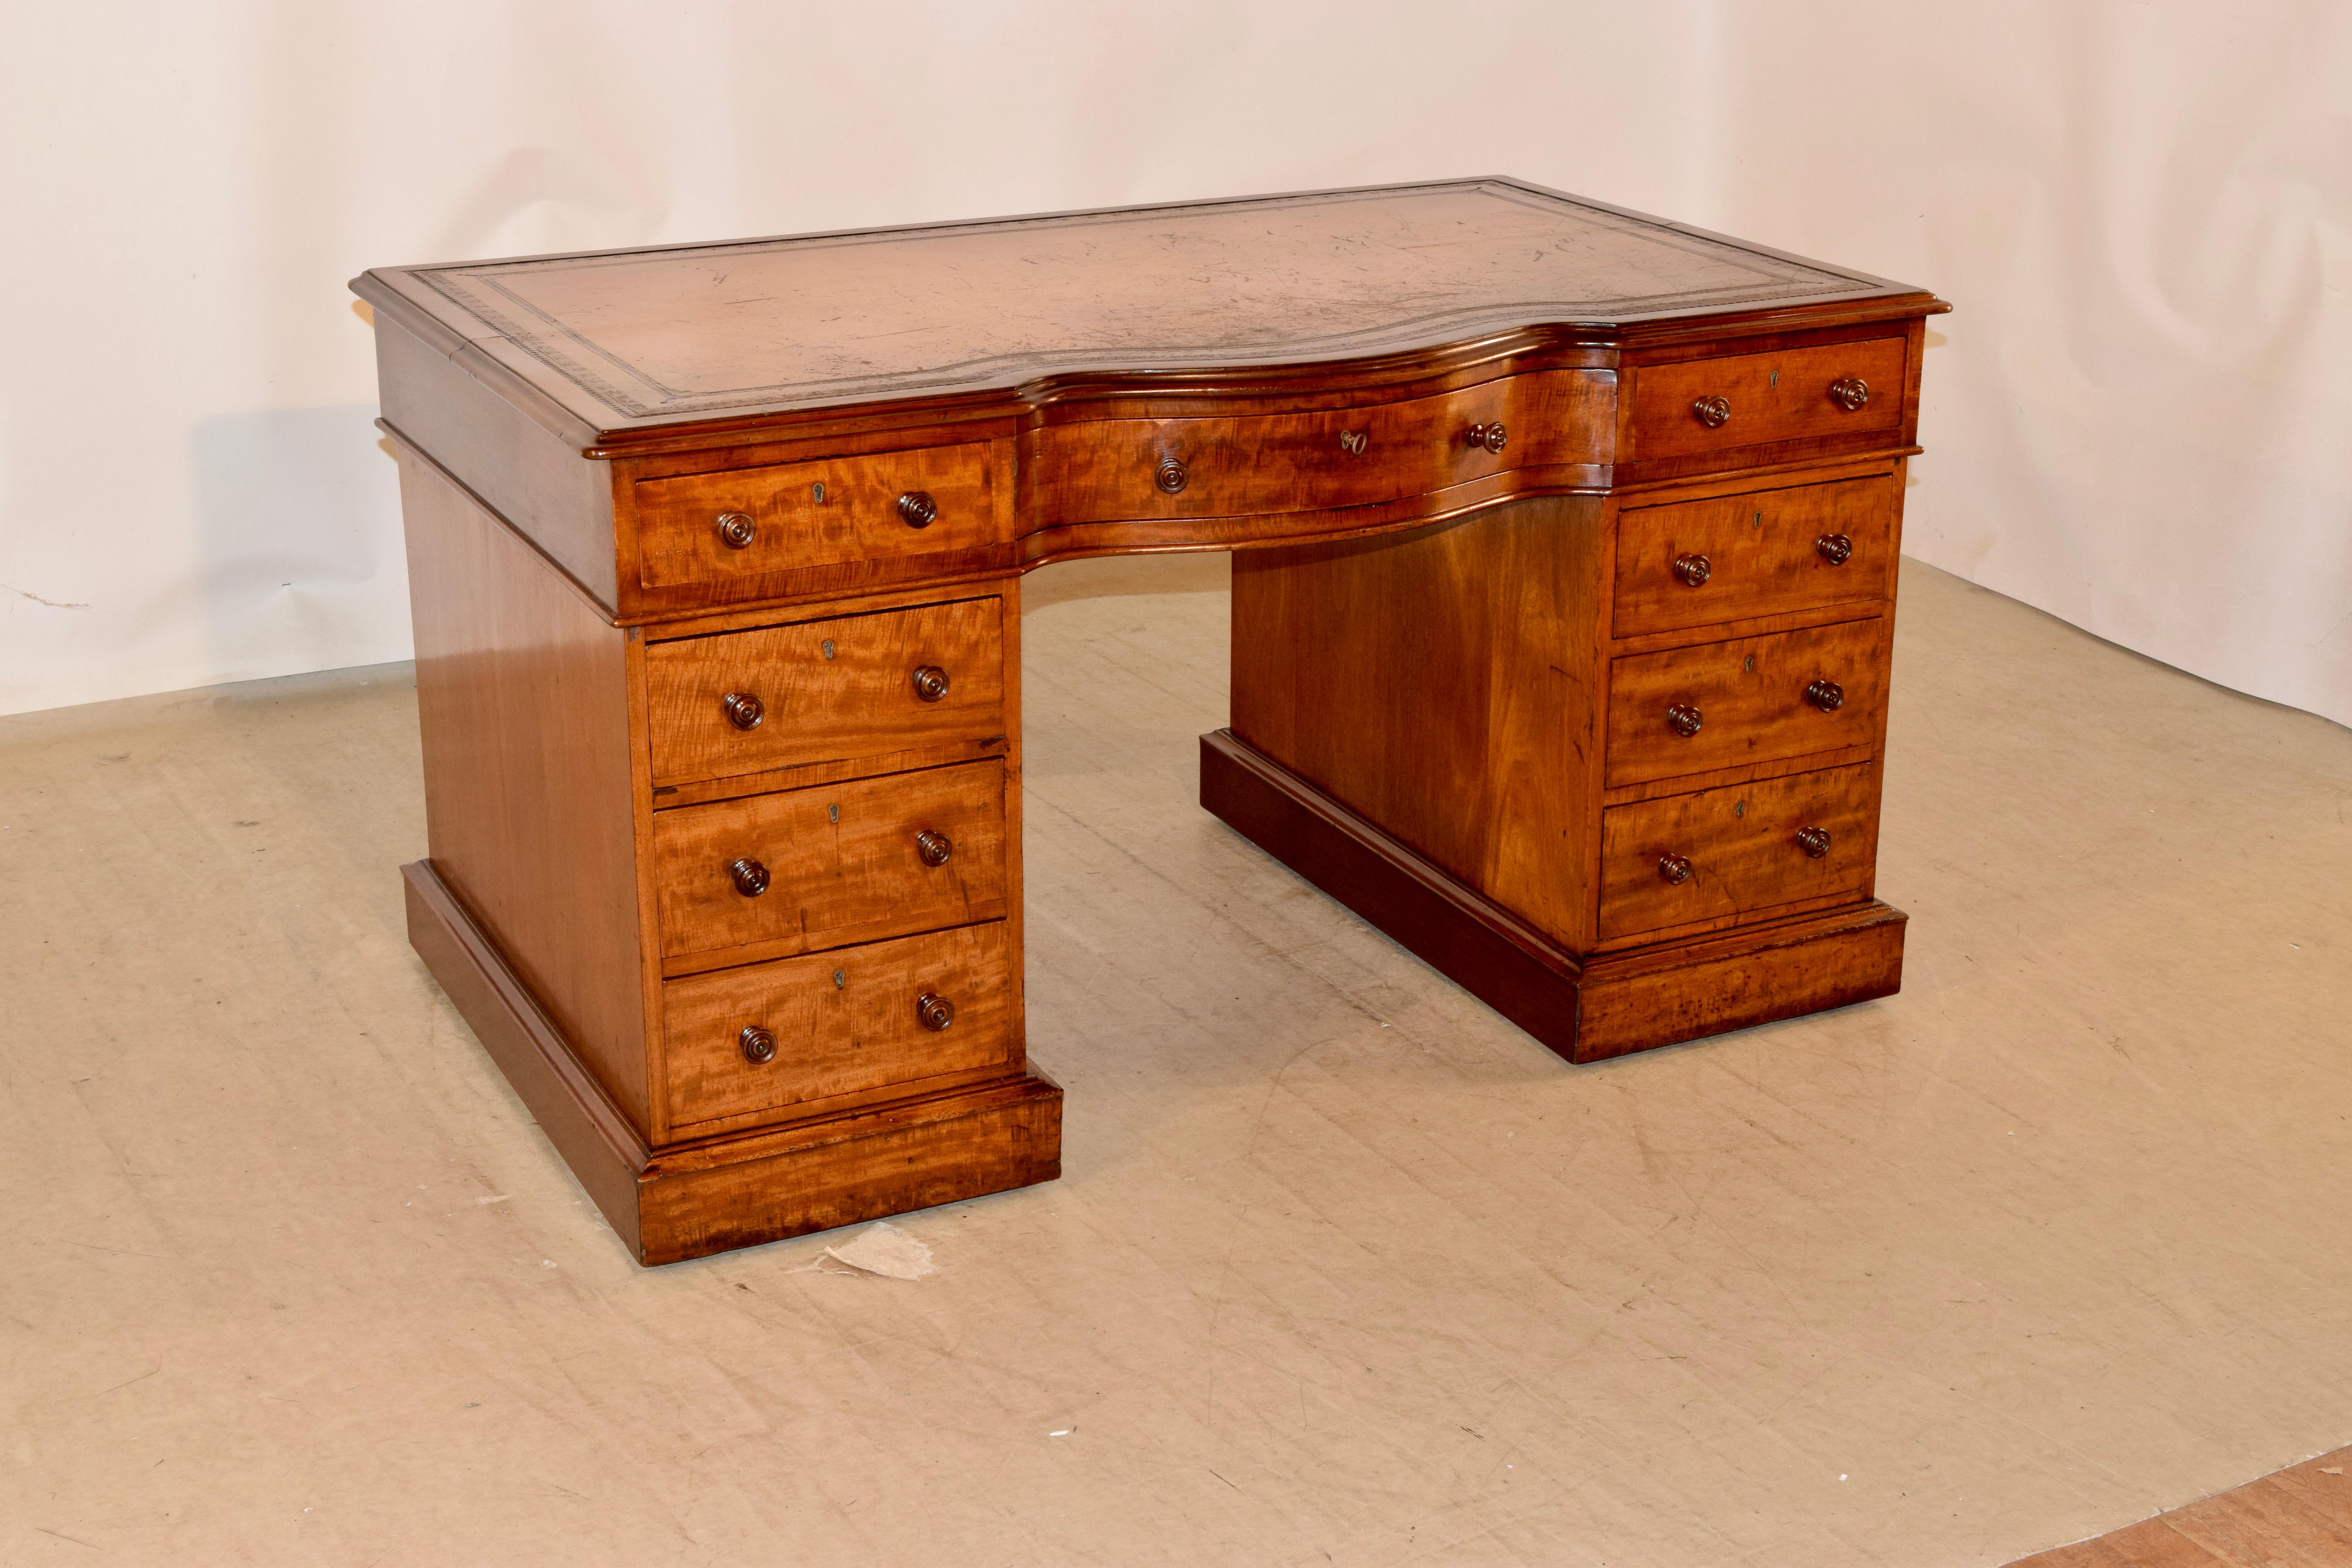 19th century English pedestal desk made from mahogany. The top is covered in the original tan leather, which has aged beautifully, and is banded by a shaped mahogany border. The desk is in a wonderfully grained and colored mahogany, which has aged